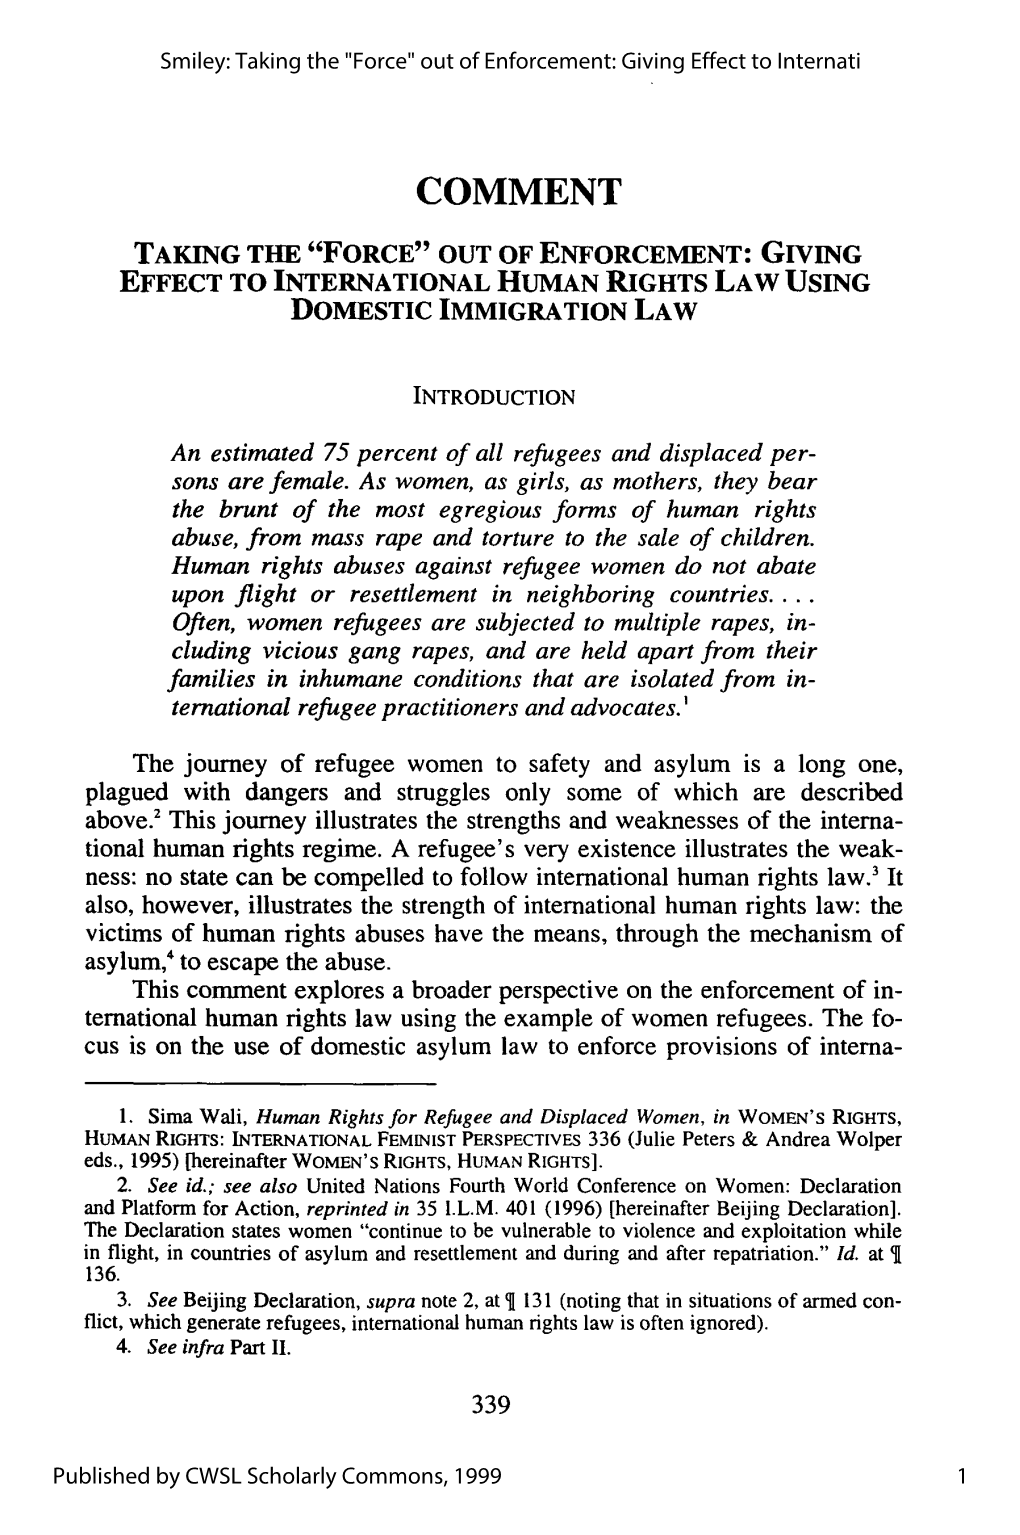 Giving EFFECT to INTERNATIONAL HUMAN RIGHTS LAW USING DOMESTIC IMMIGRATION LAW